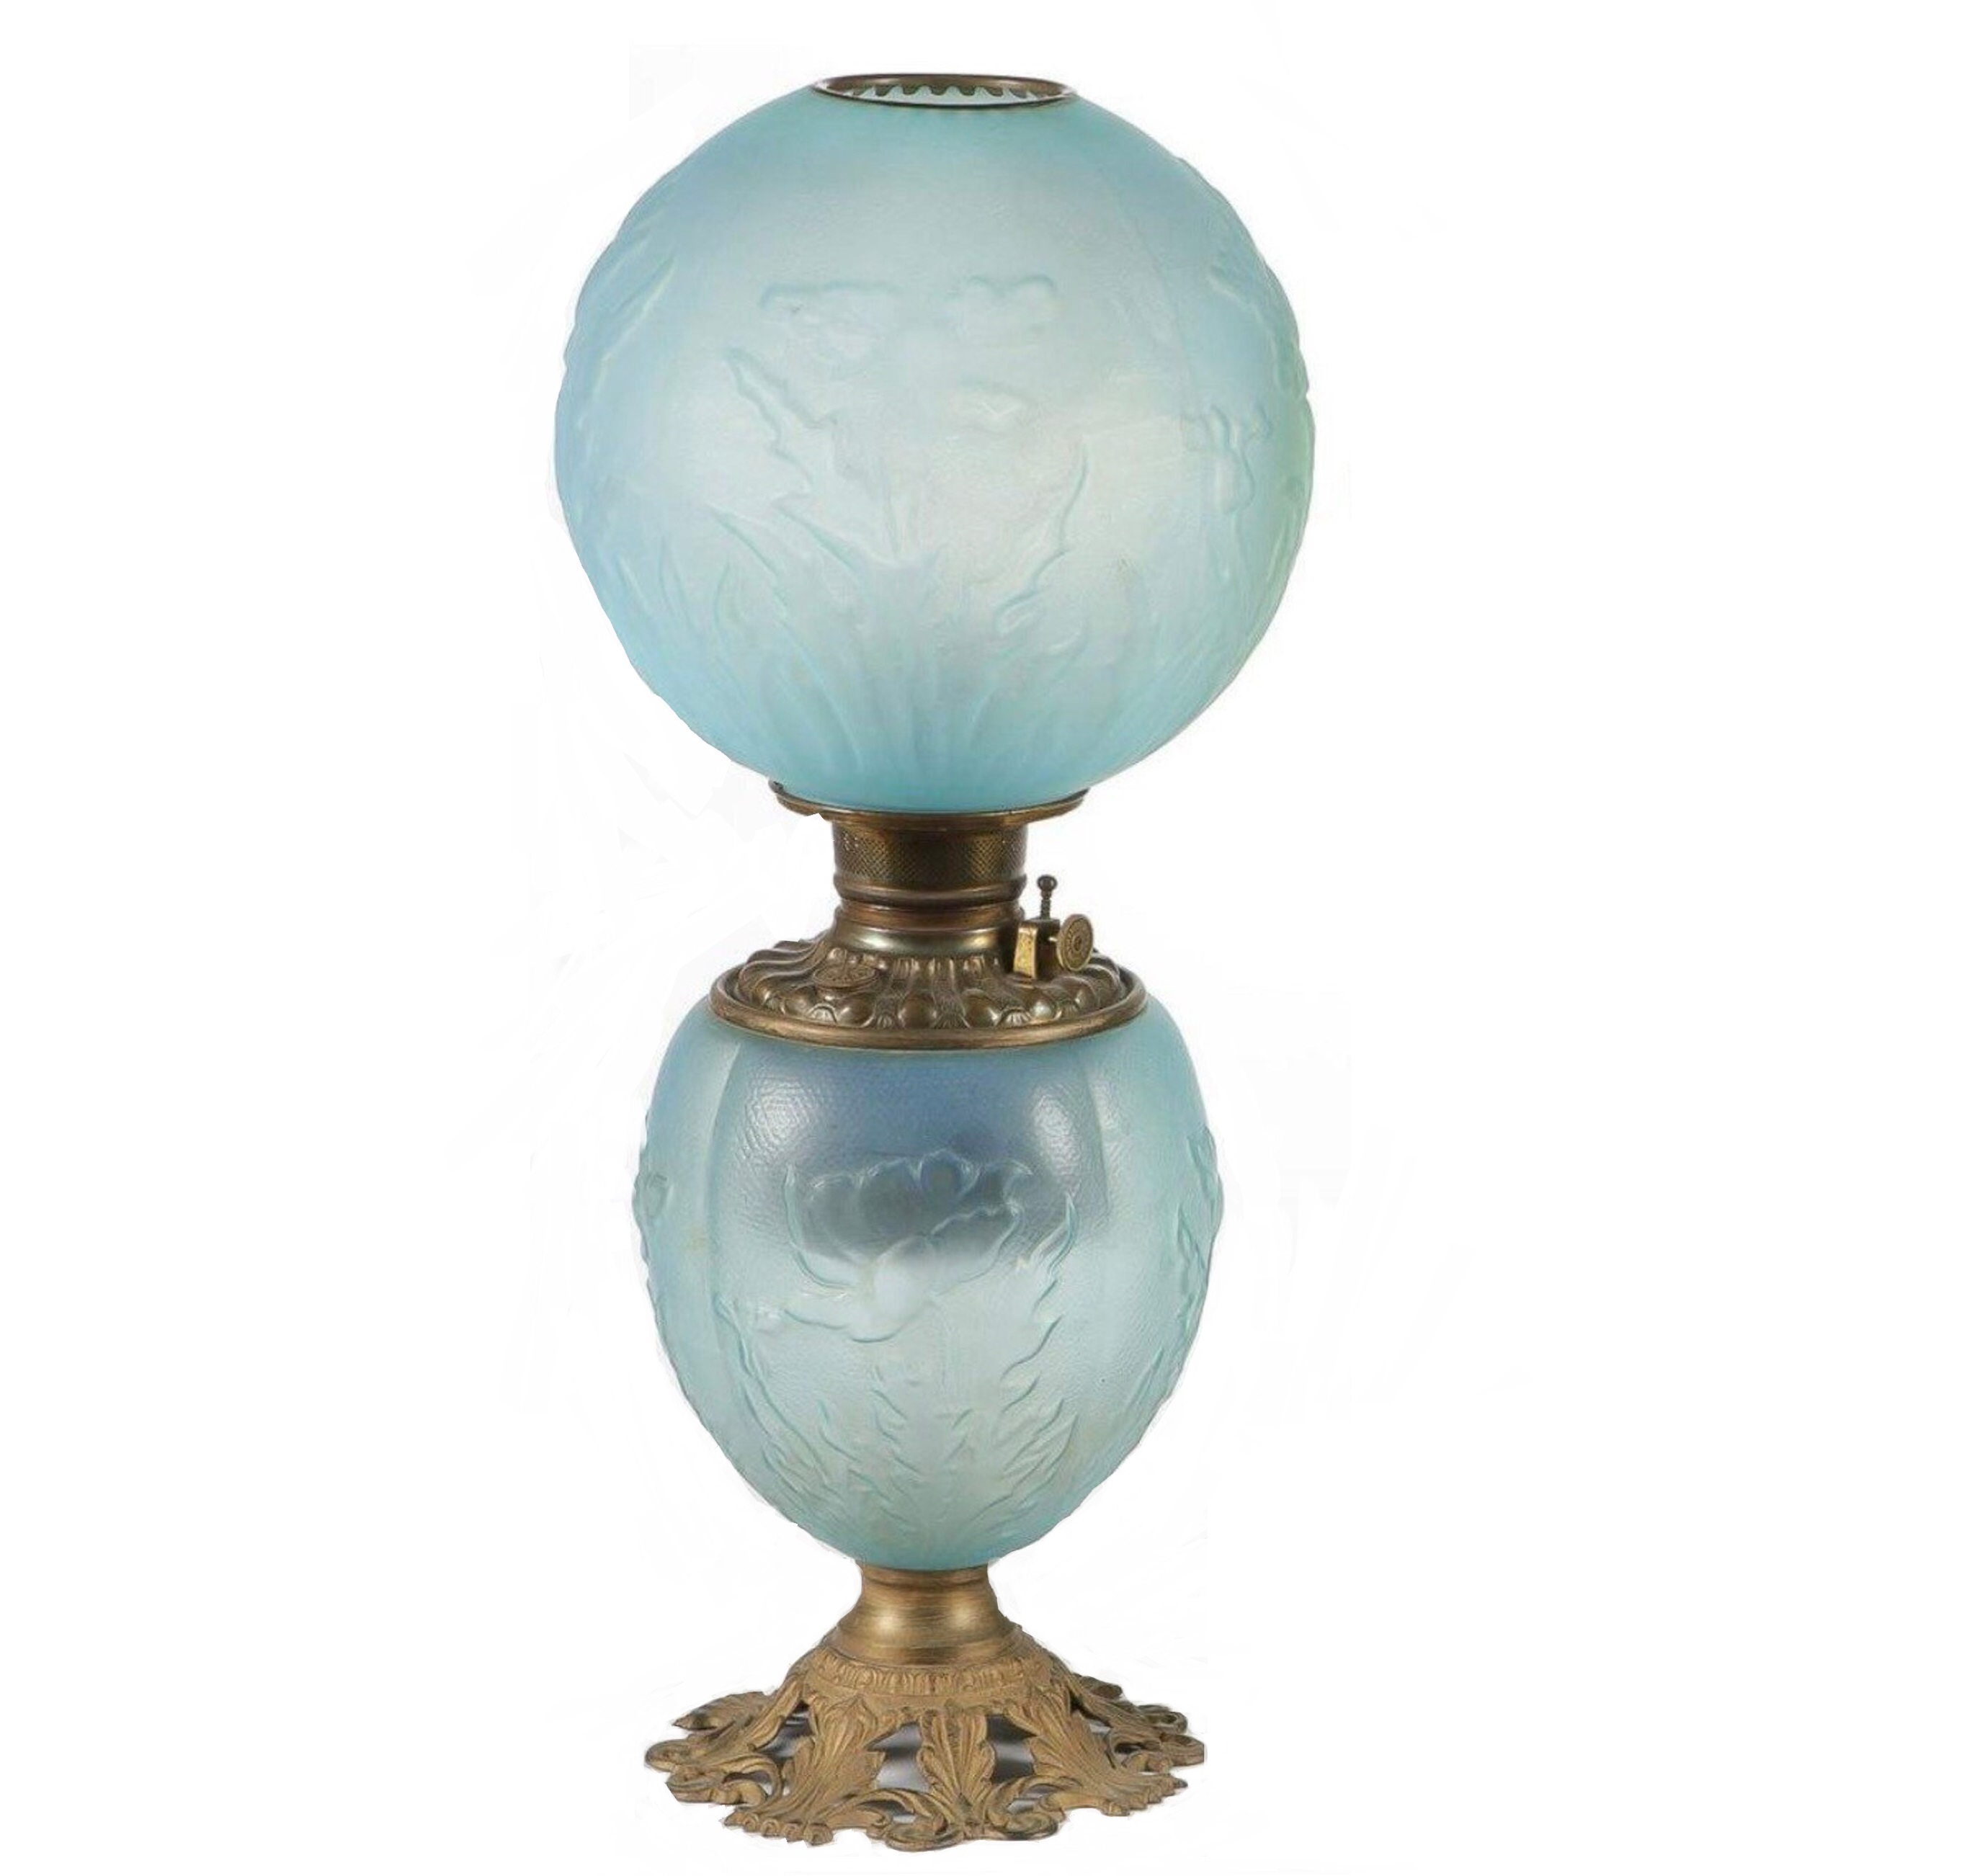 Antique oil lamp in a gone with the wind design